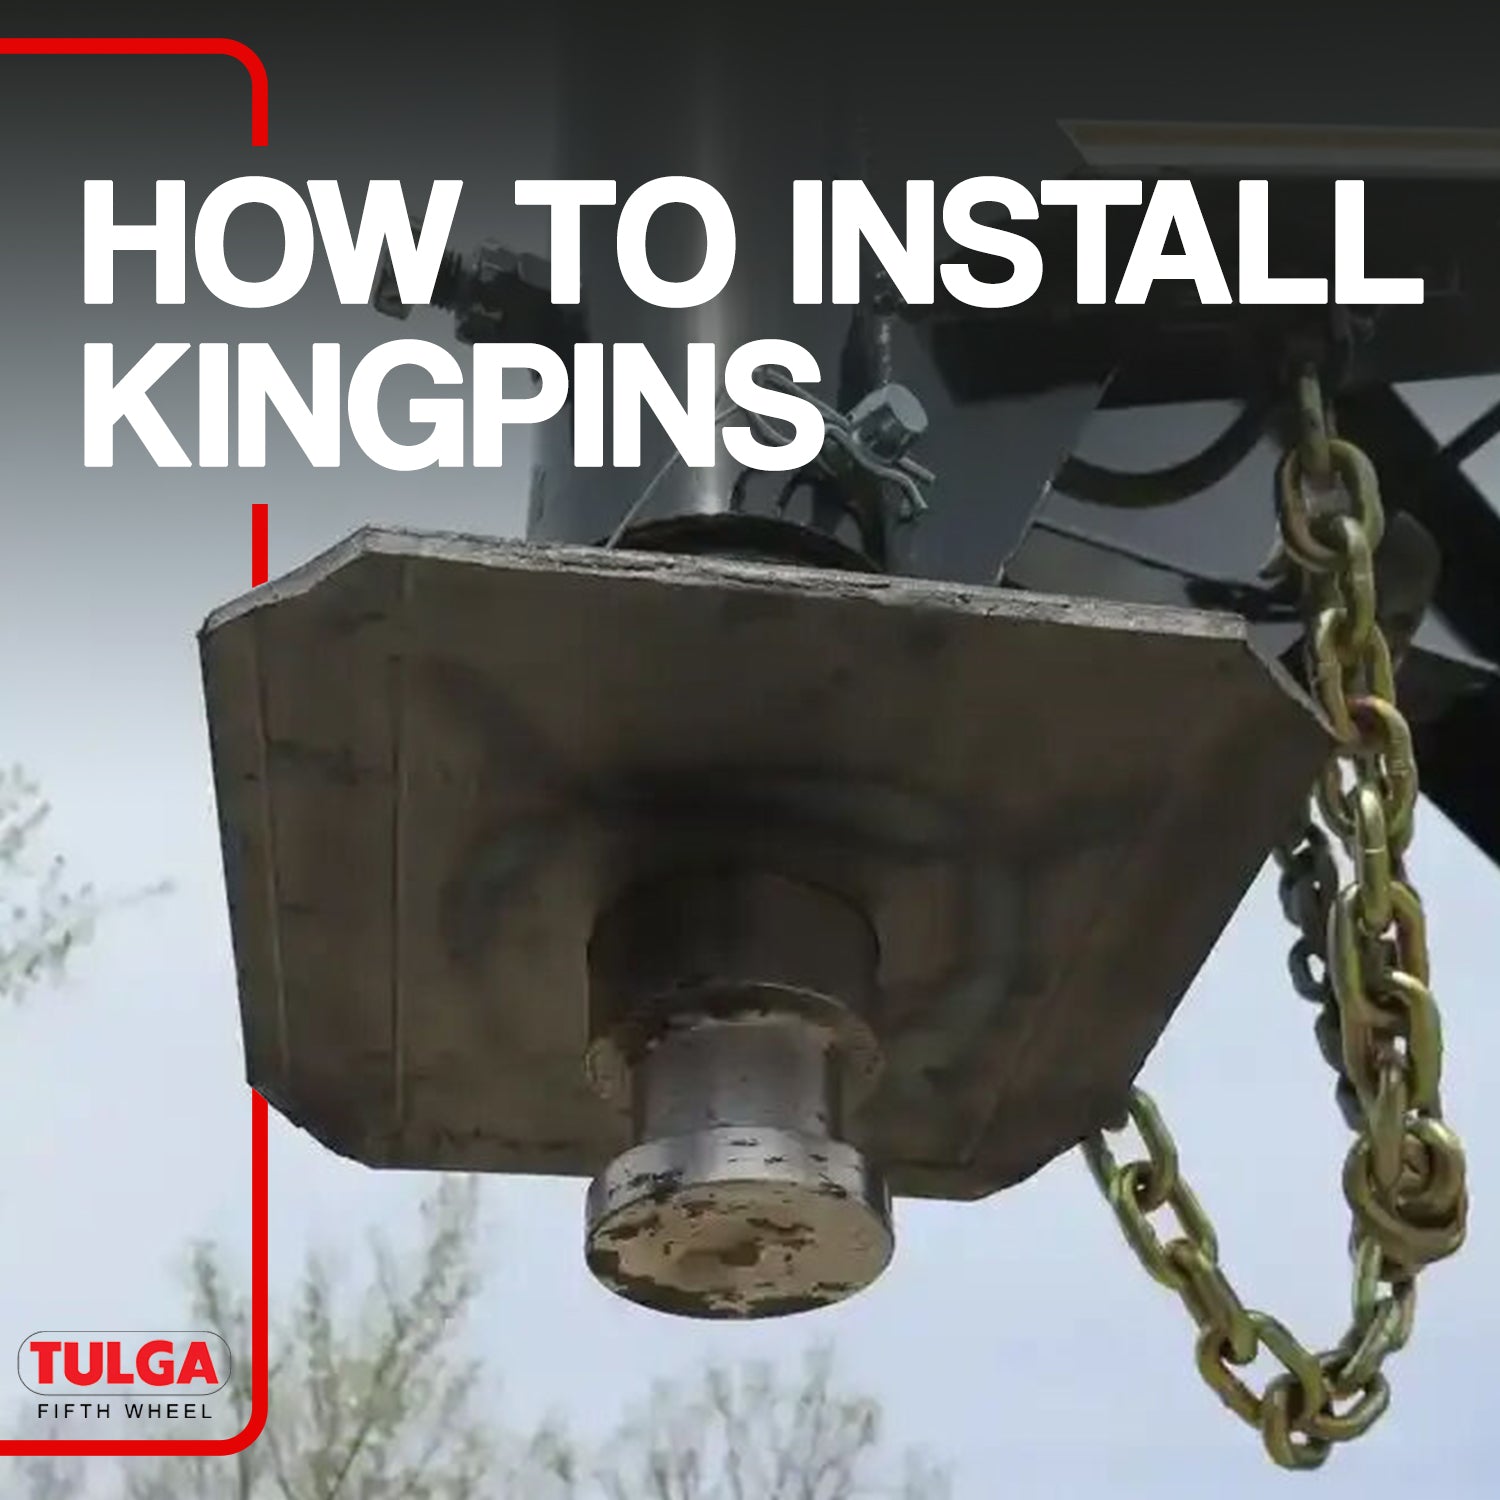 How to Install Kingpins